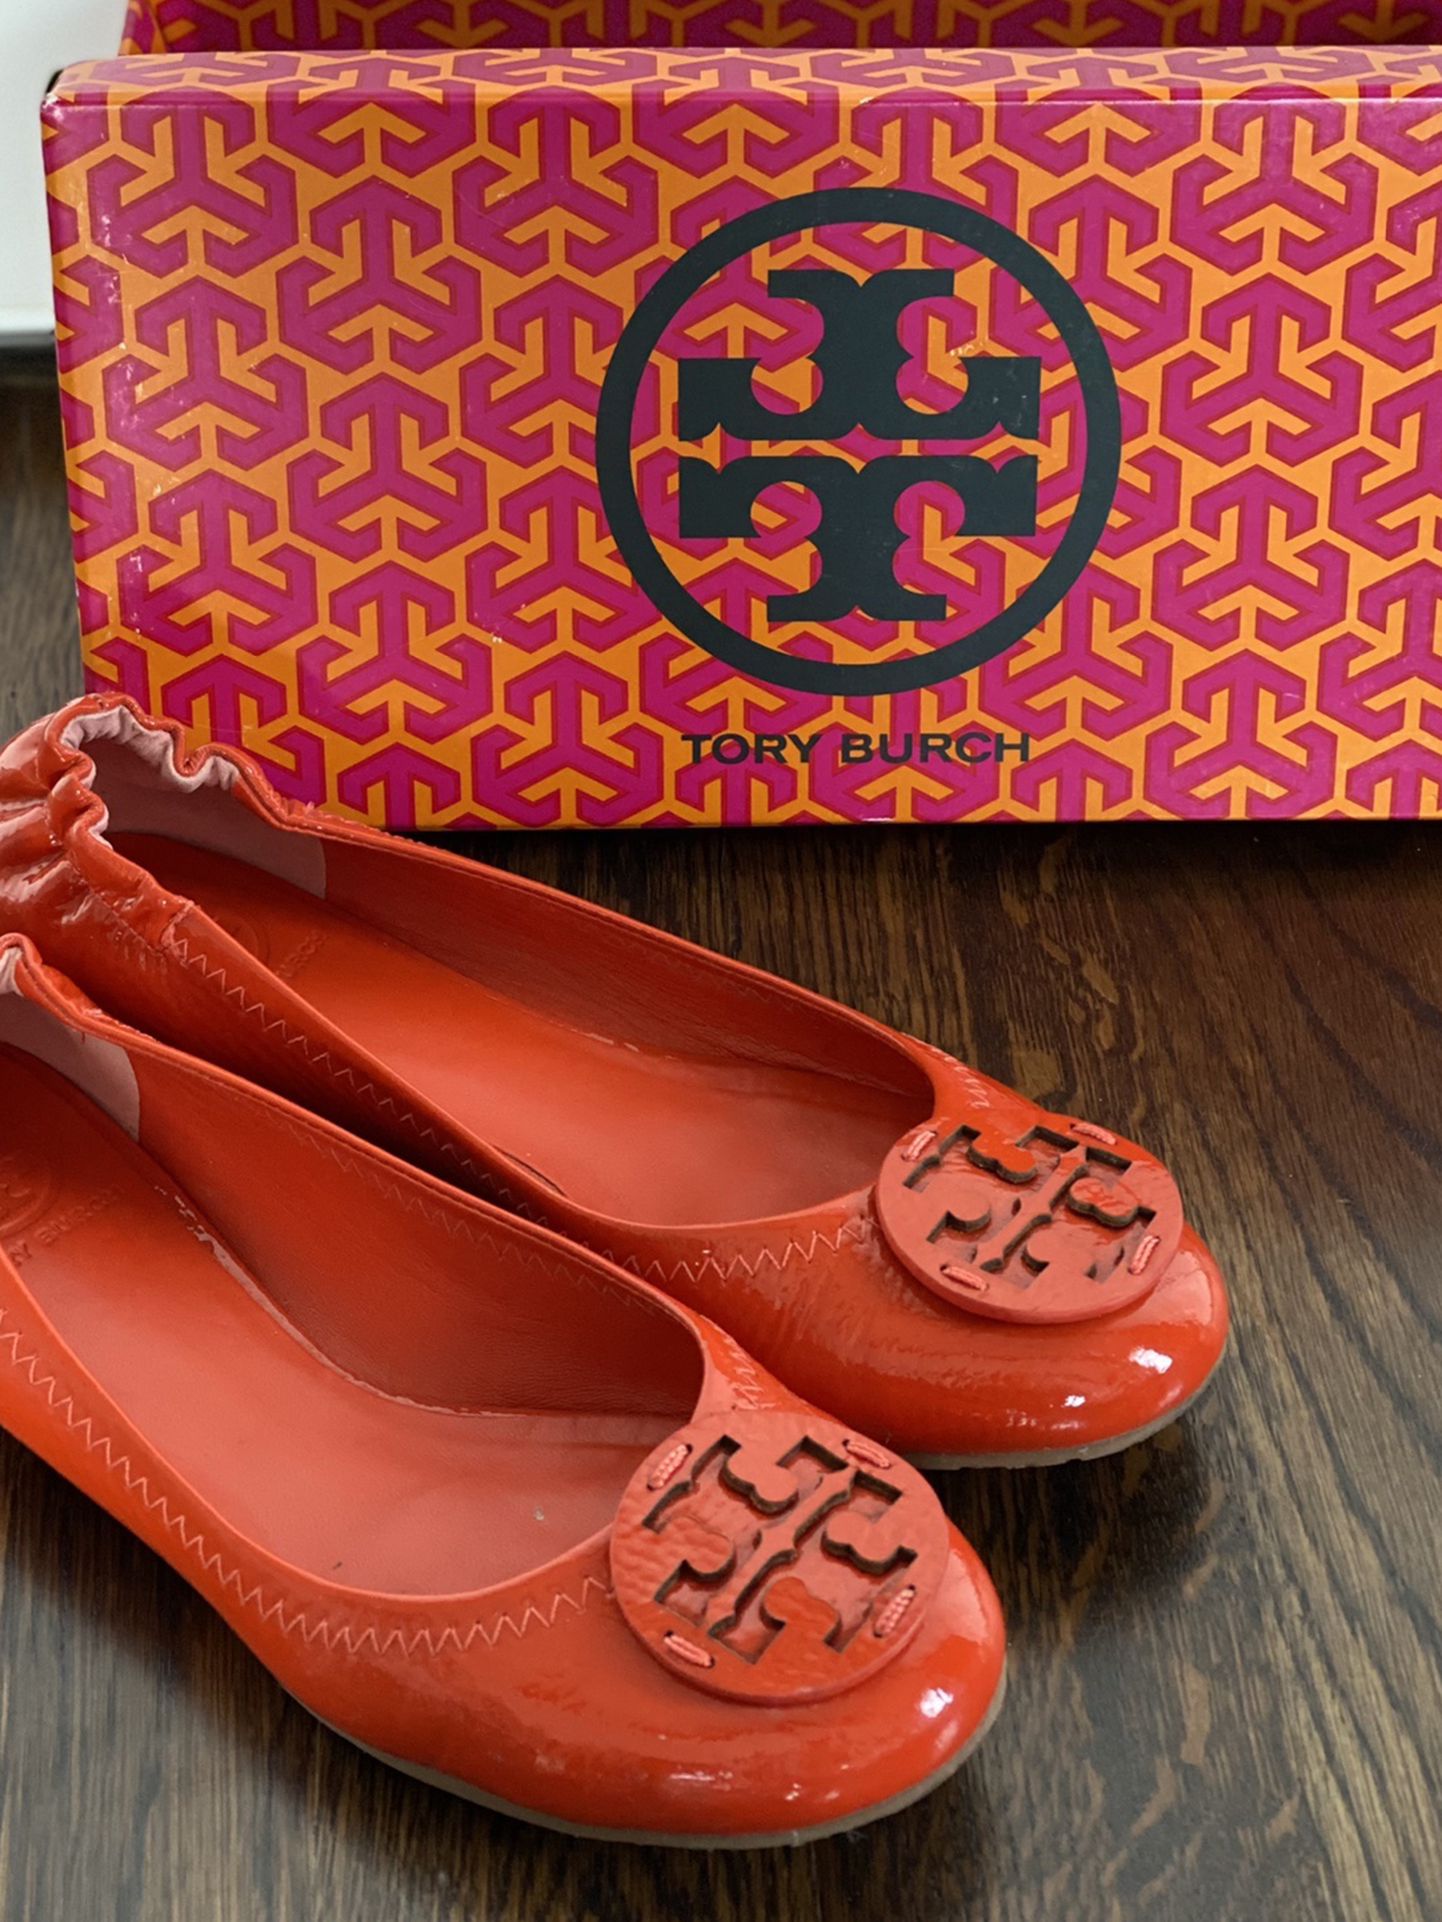 Tory Burch - Ballet Flats - Patent Leather Size 8